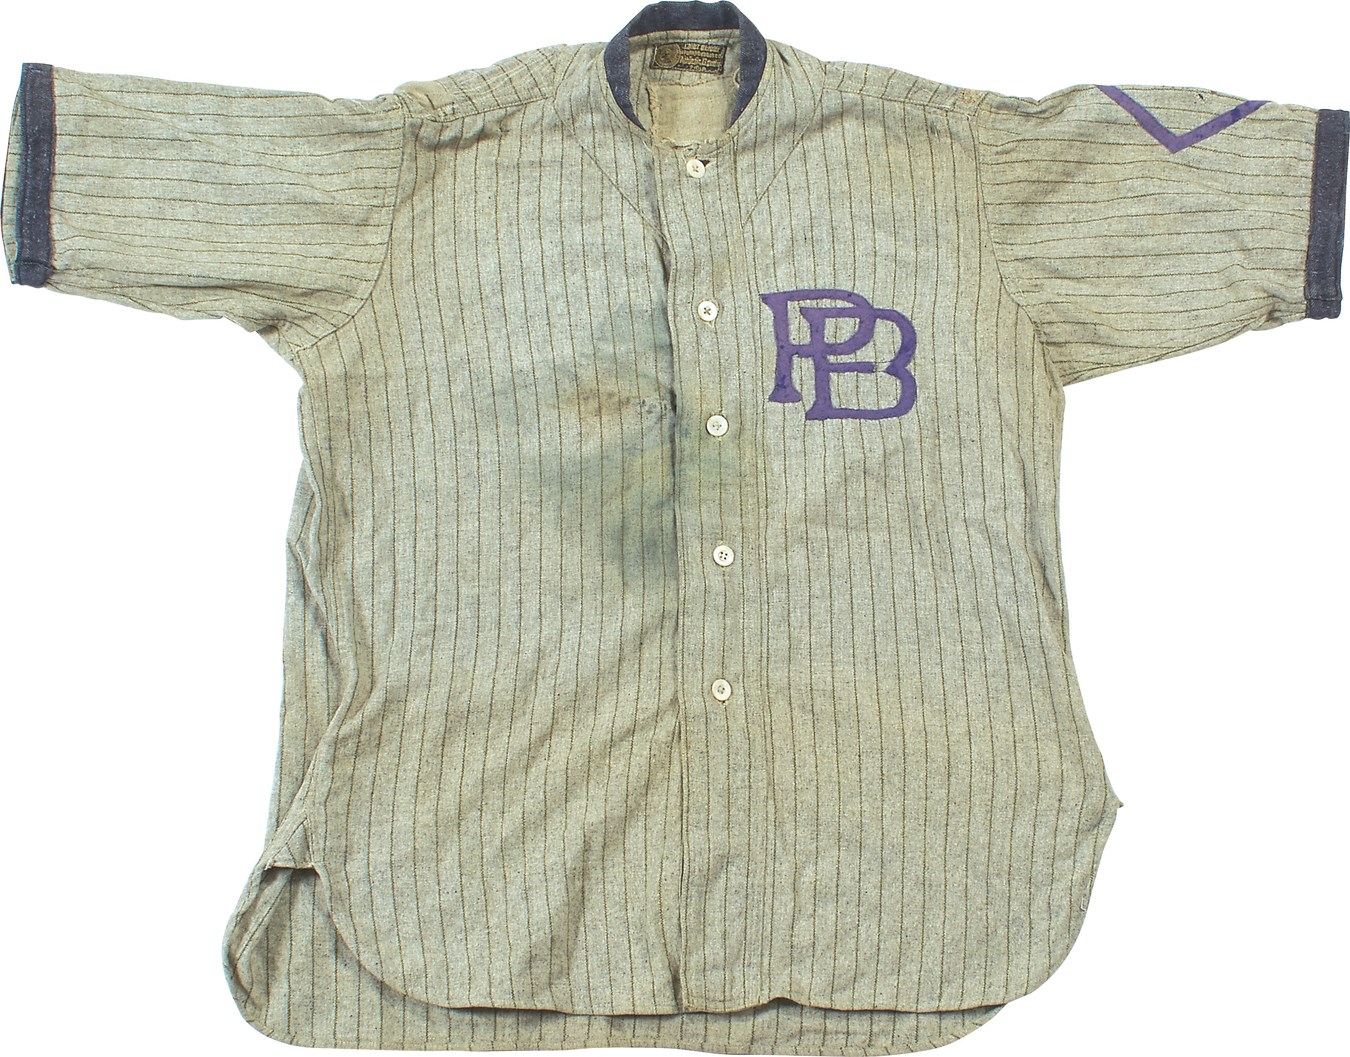 Antique Sporting Goods - 1910s Chief Bender Sporting Goods Full Baseball Uniform - Only One Known